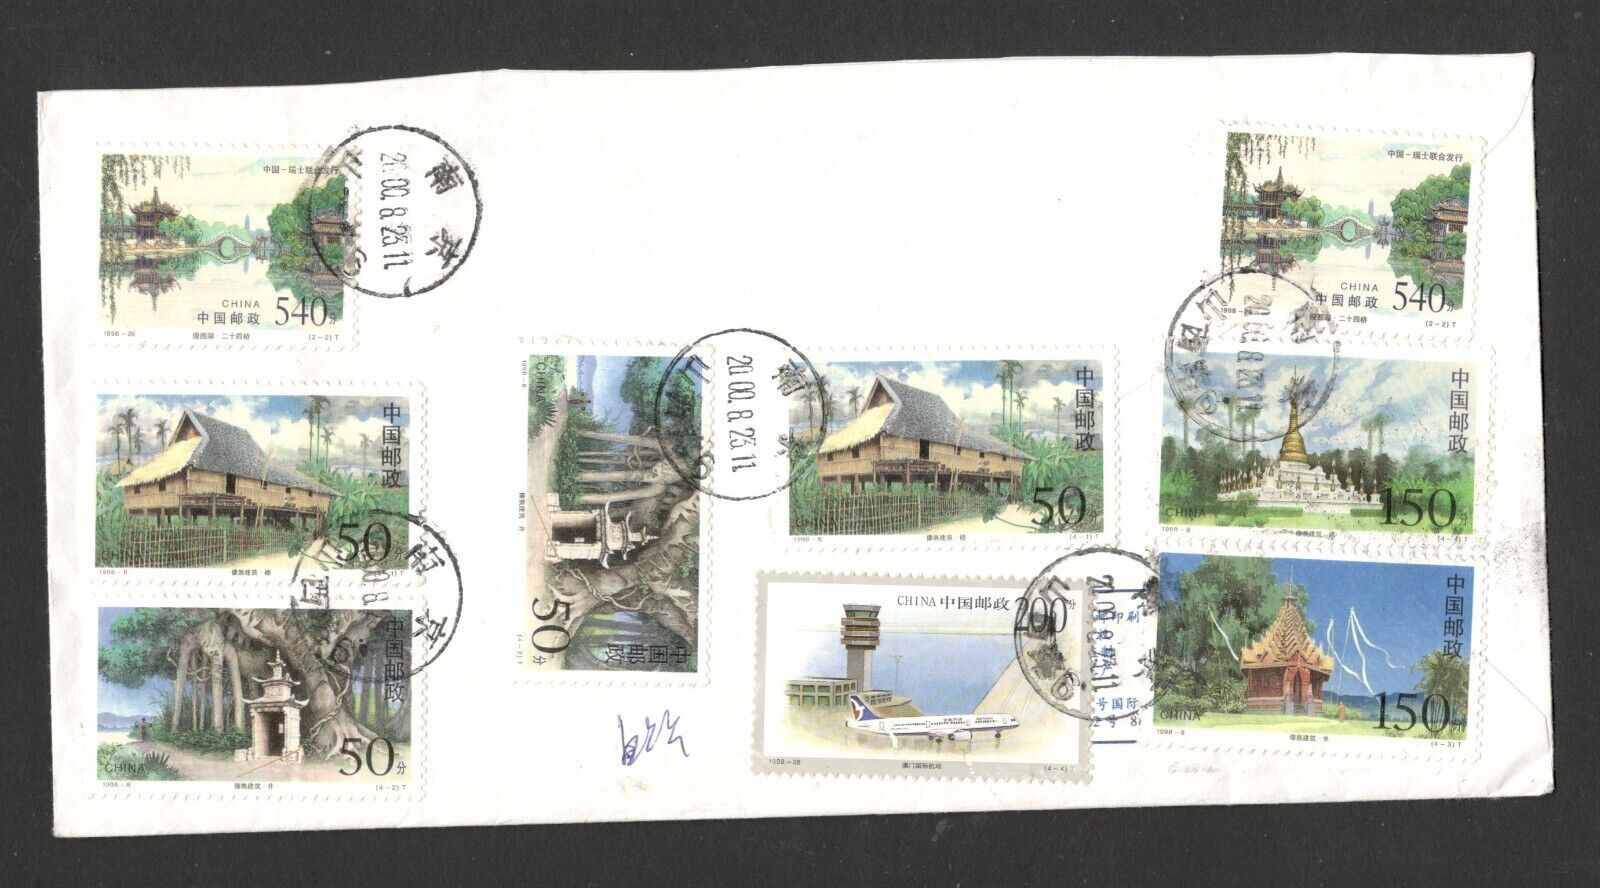 CHINA - REGISTERED AIRMAIL COVER - MULTIFRANKED - 2000.